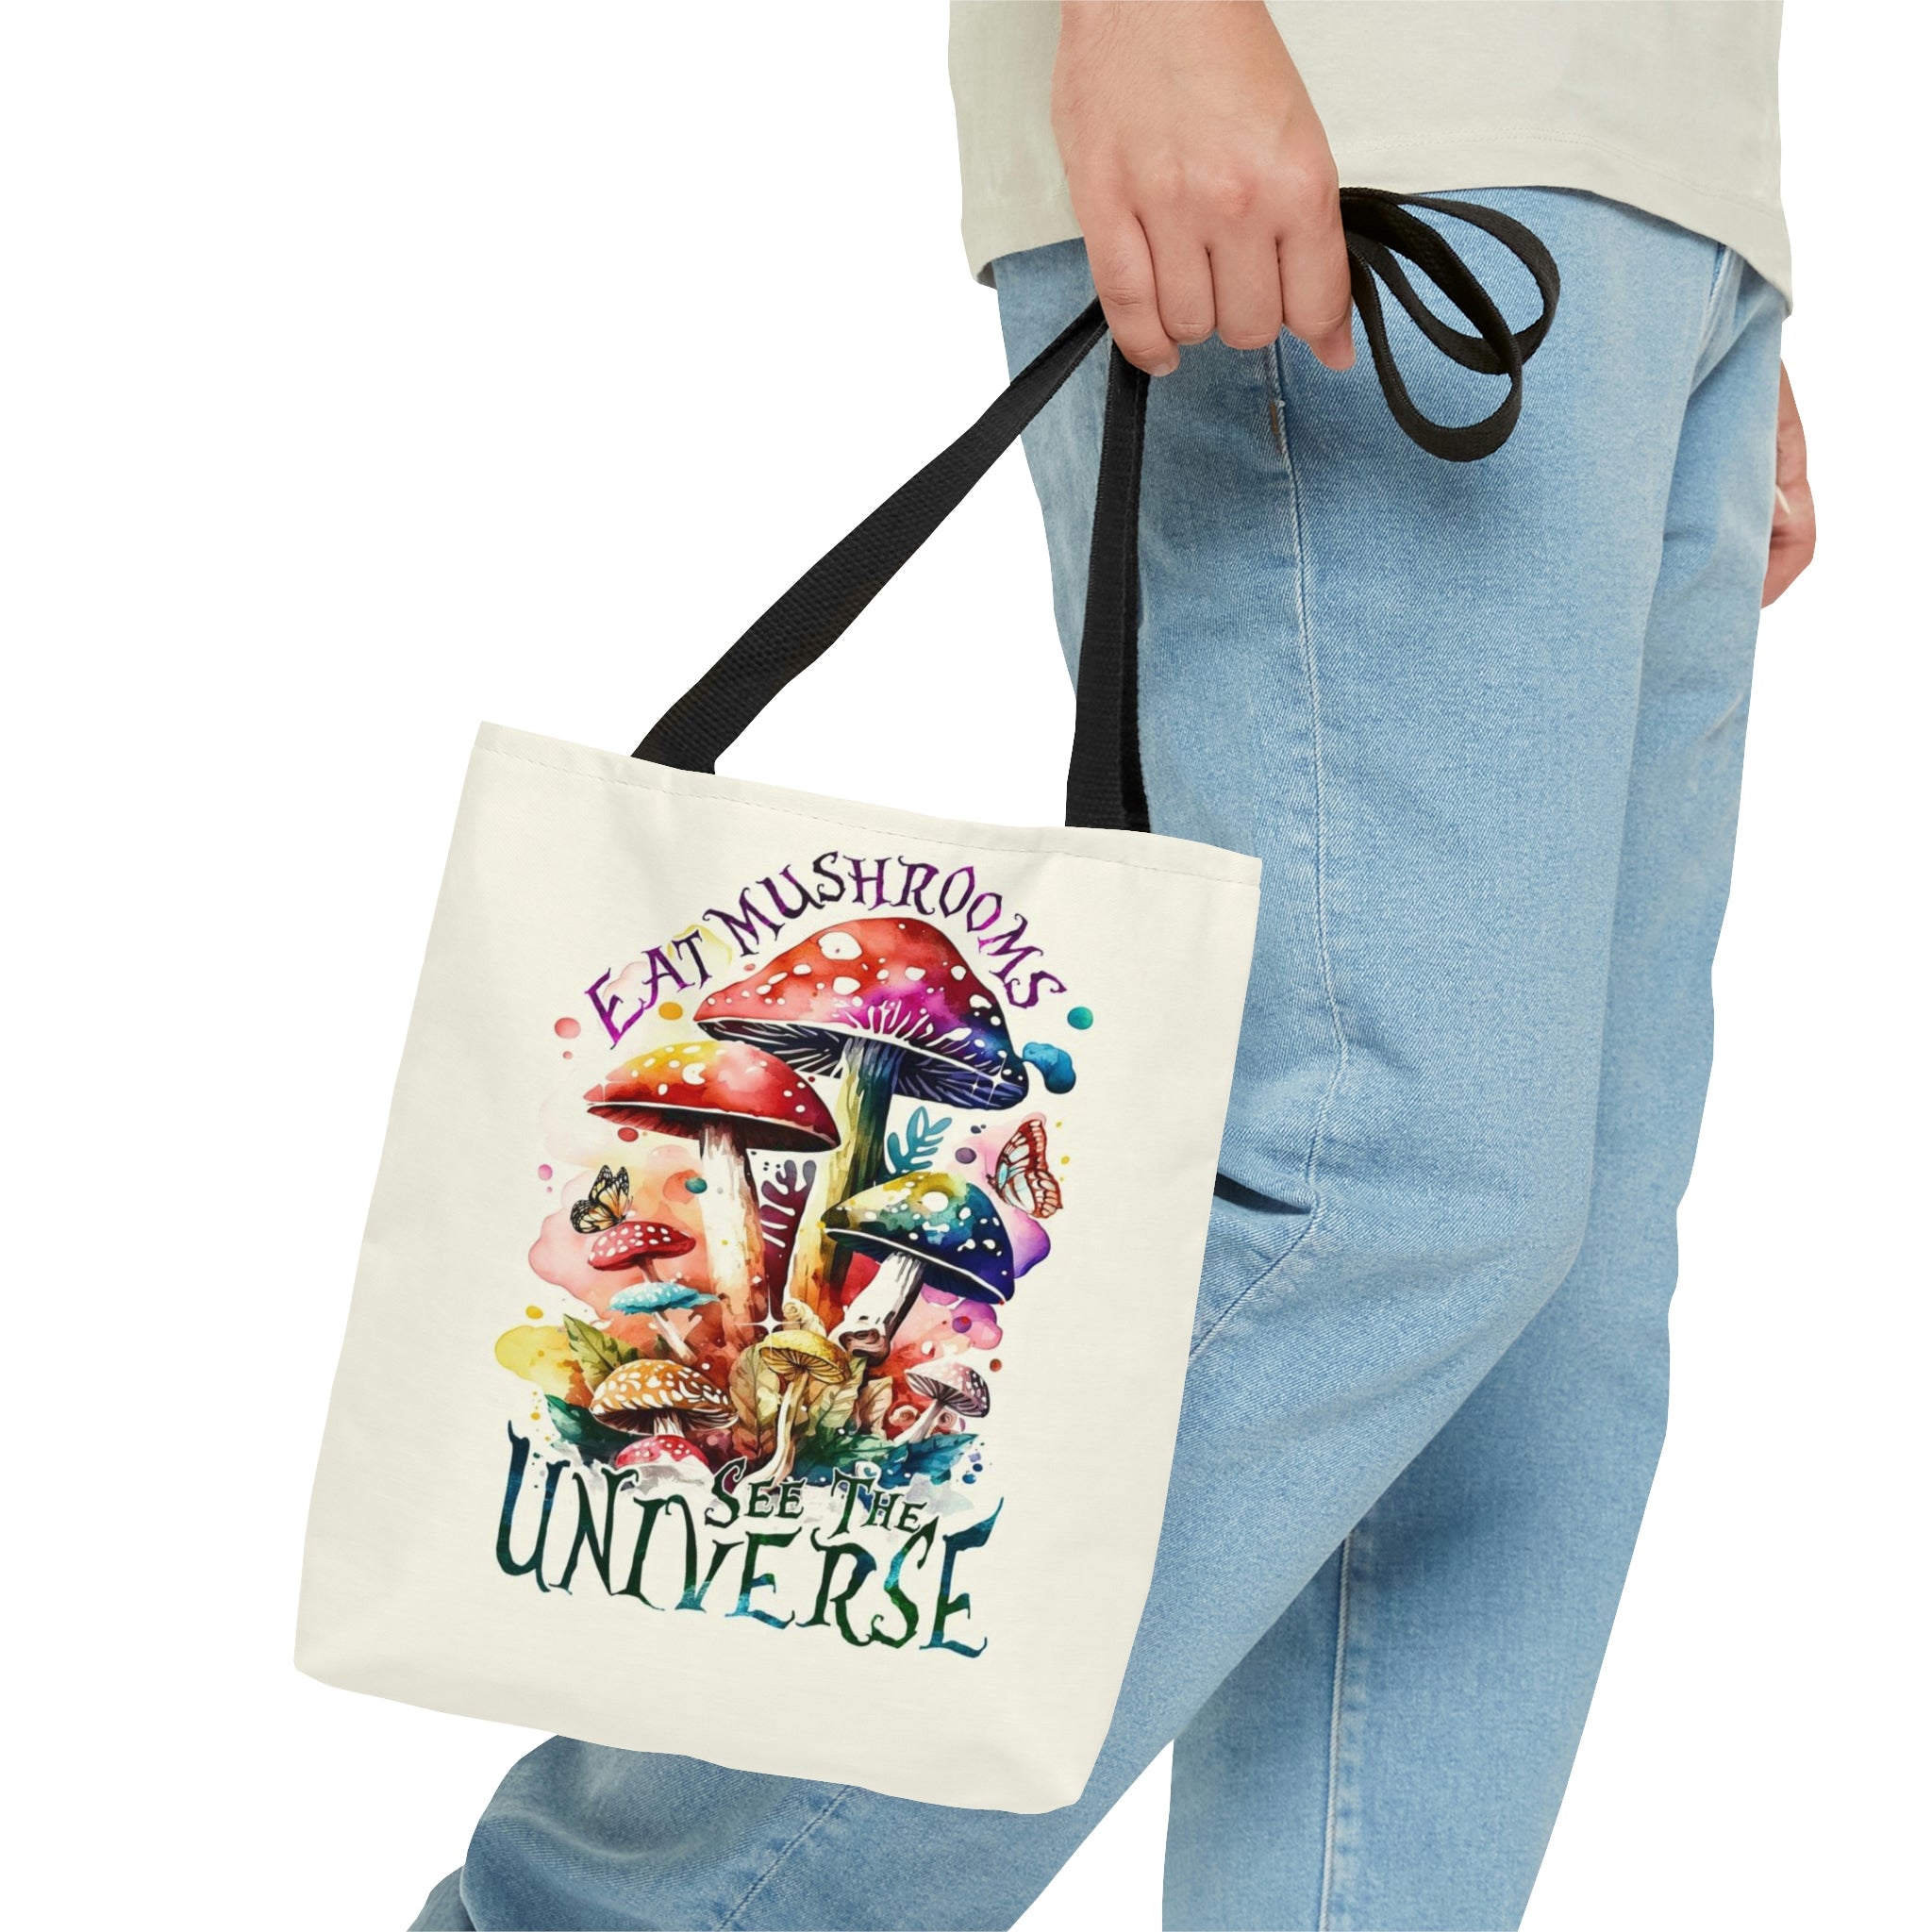 EAT MUSHROOMS SEE THE UNIVERSE TOTE BAG - TY2002232